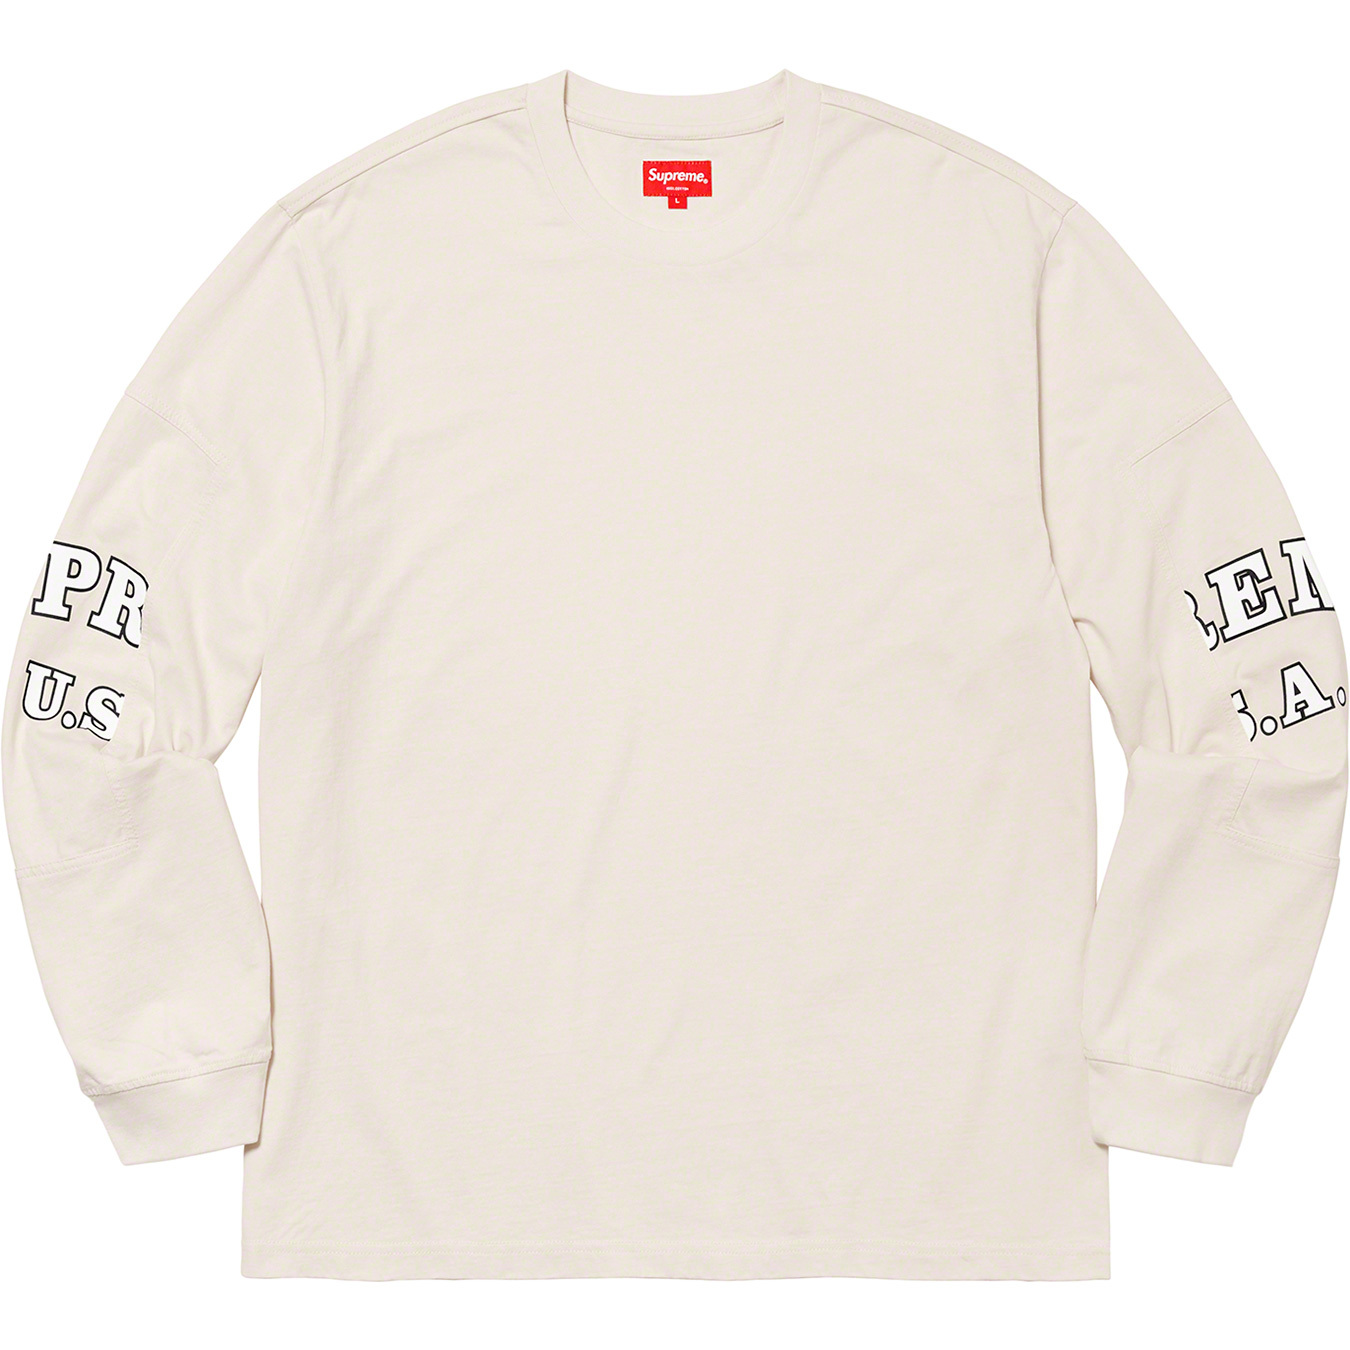 Supreme Cutout Sleeves L/S Top